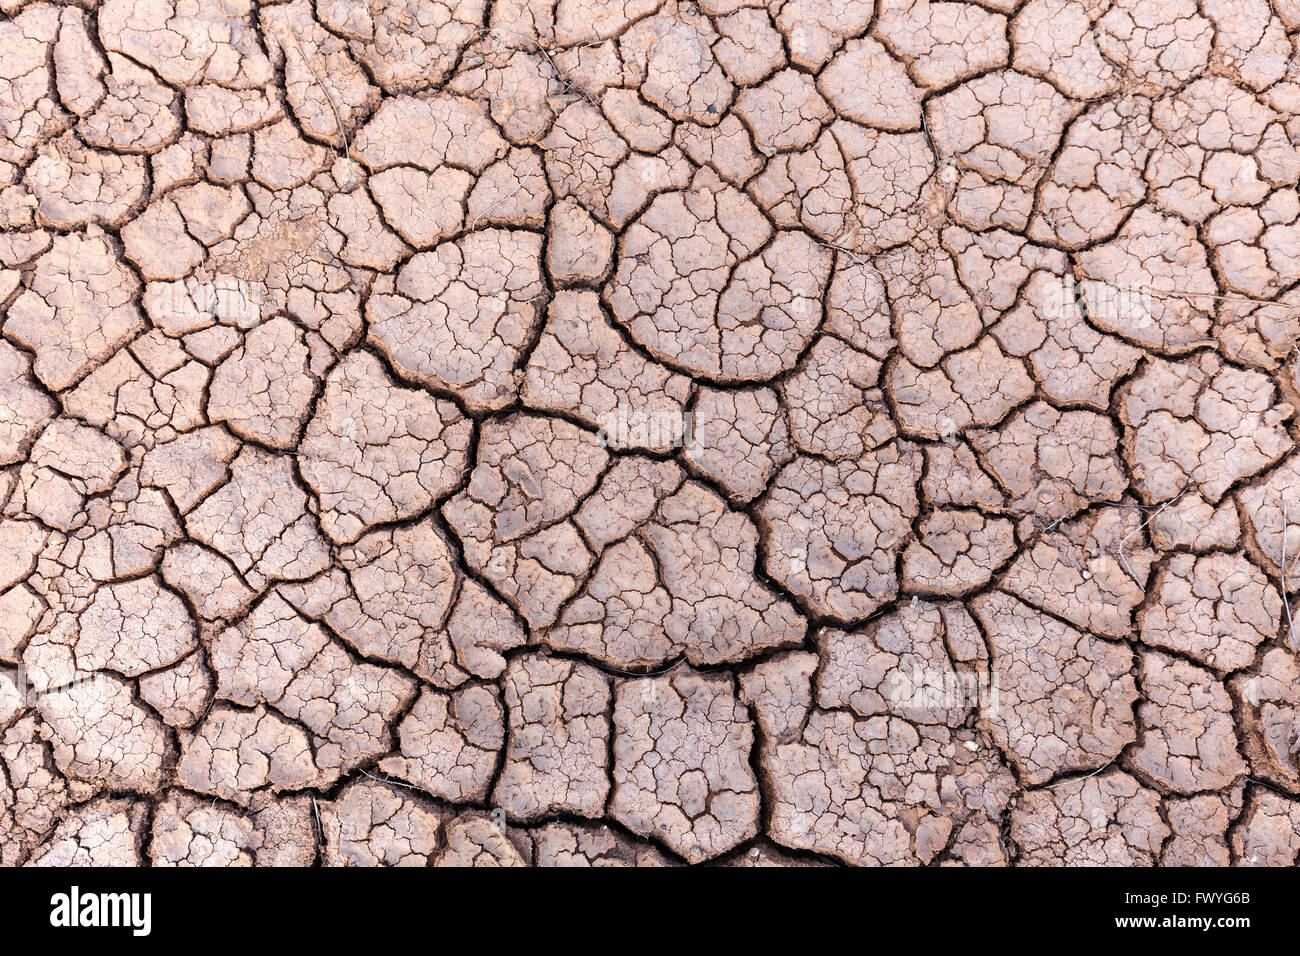 Dried earth, dry cracks in the ground, dried clay surface, Fuerteventura, Canary Islands, Spain Stock Photo